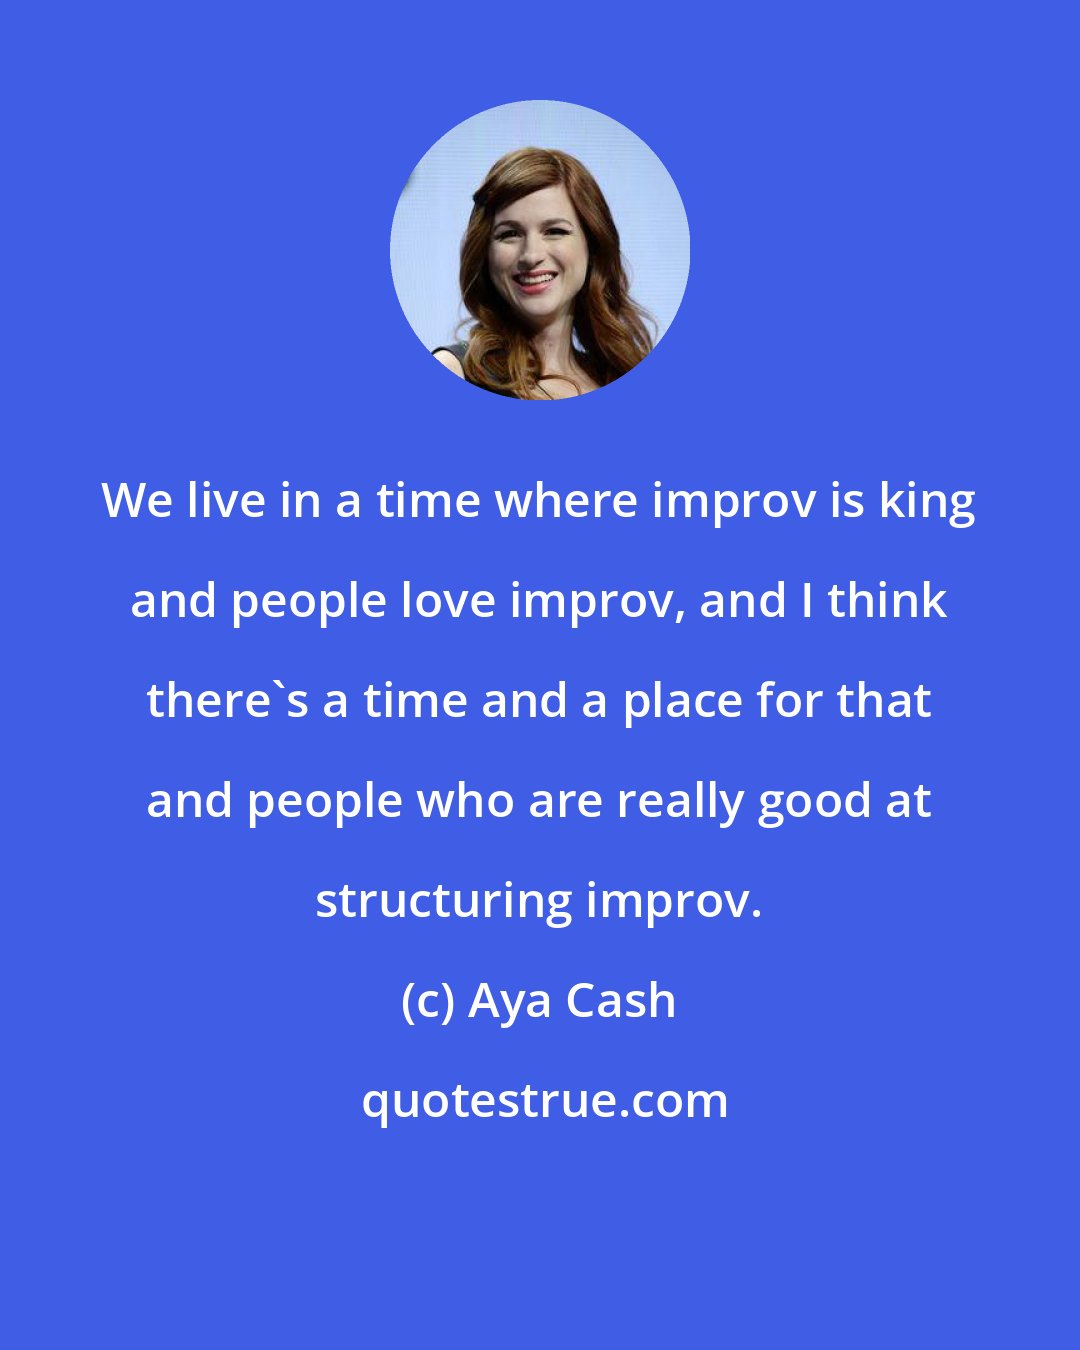 Aya Cash: We live in a time where improv is king and people love improv, and I think there's a time and a place for that and people who are really good at structuring improv.